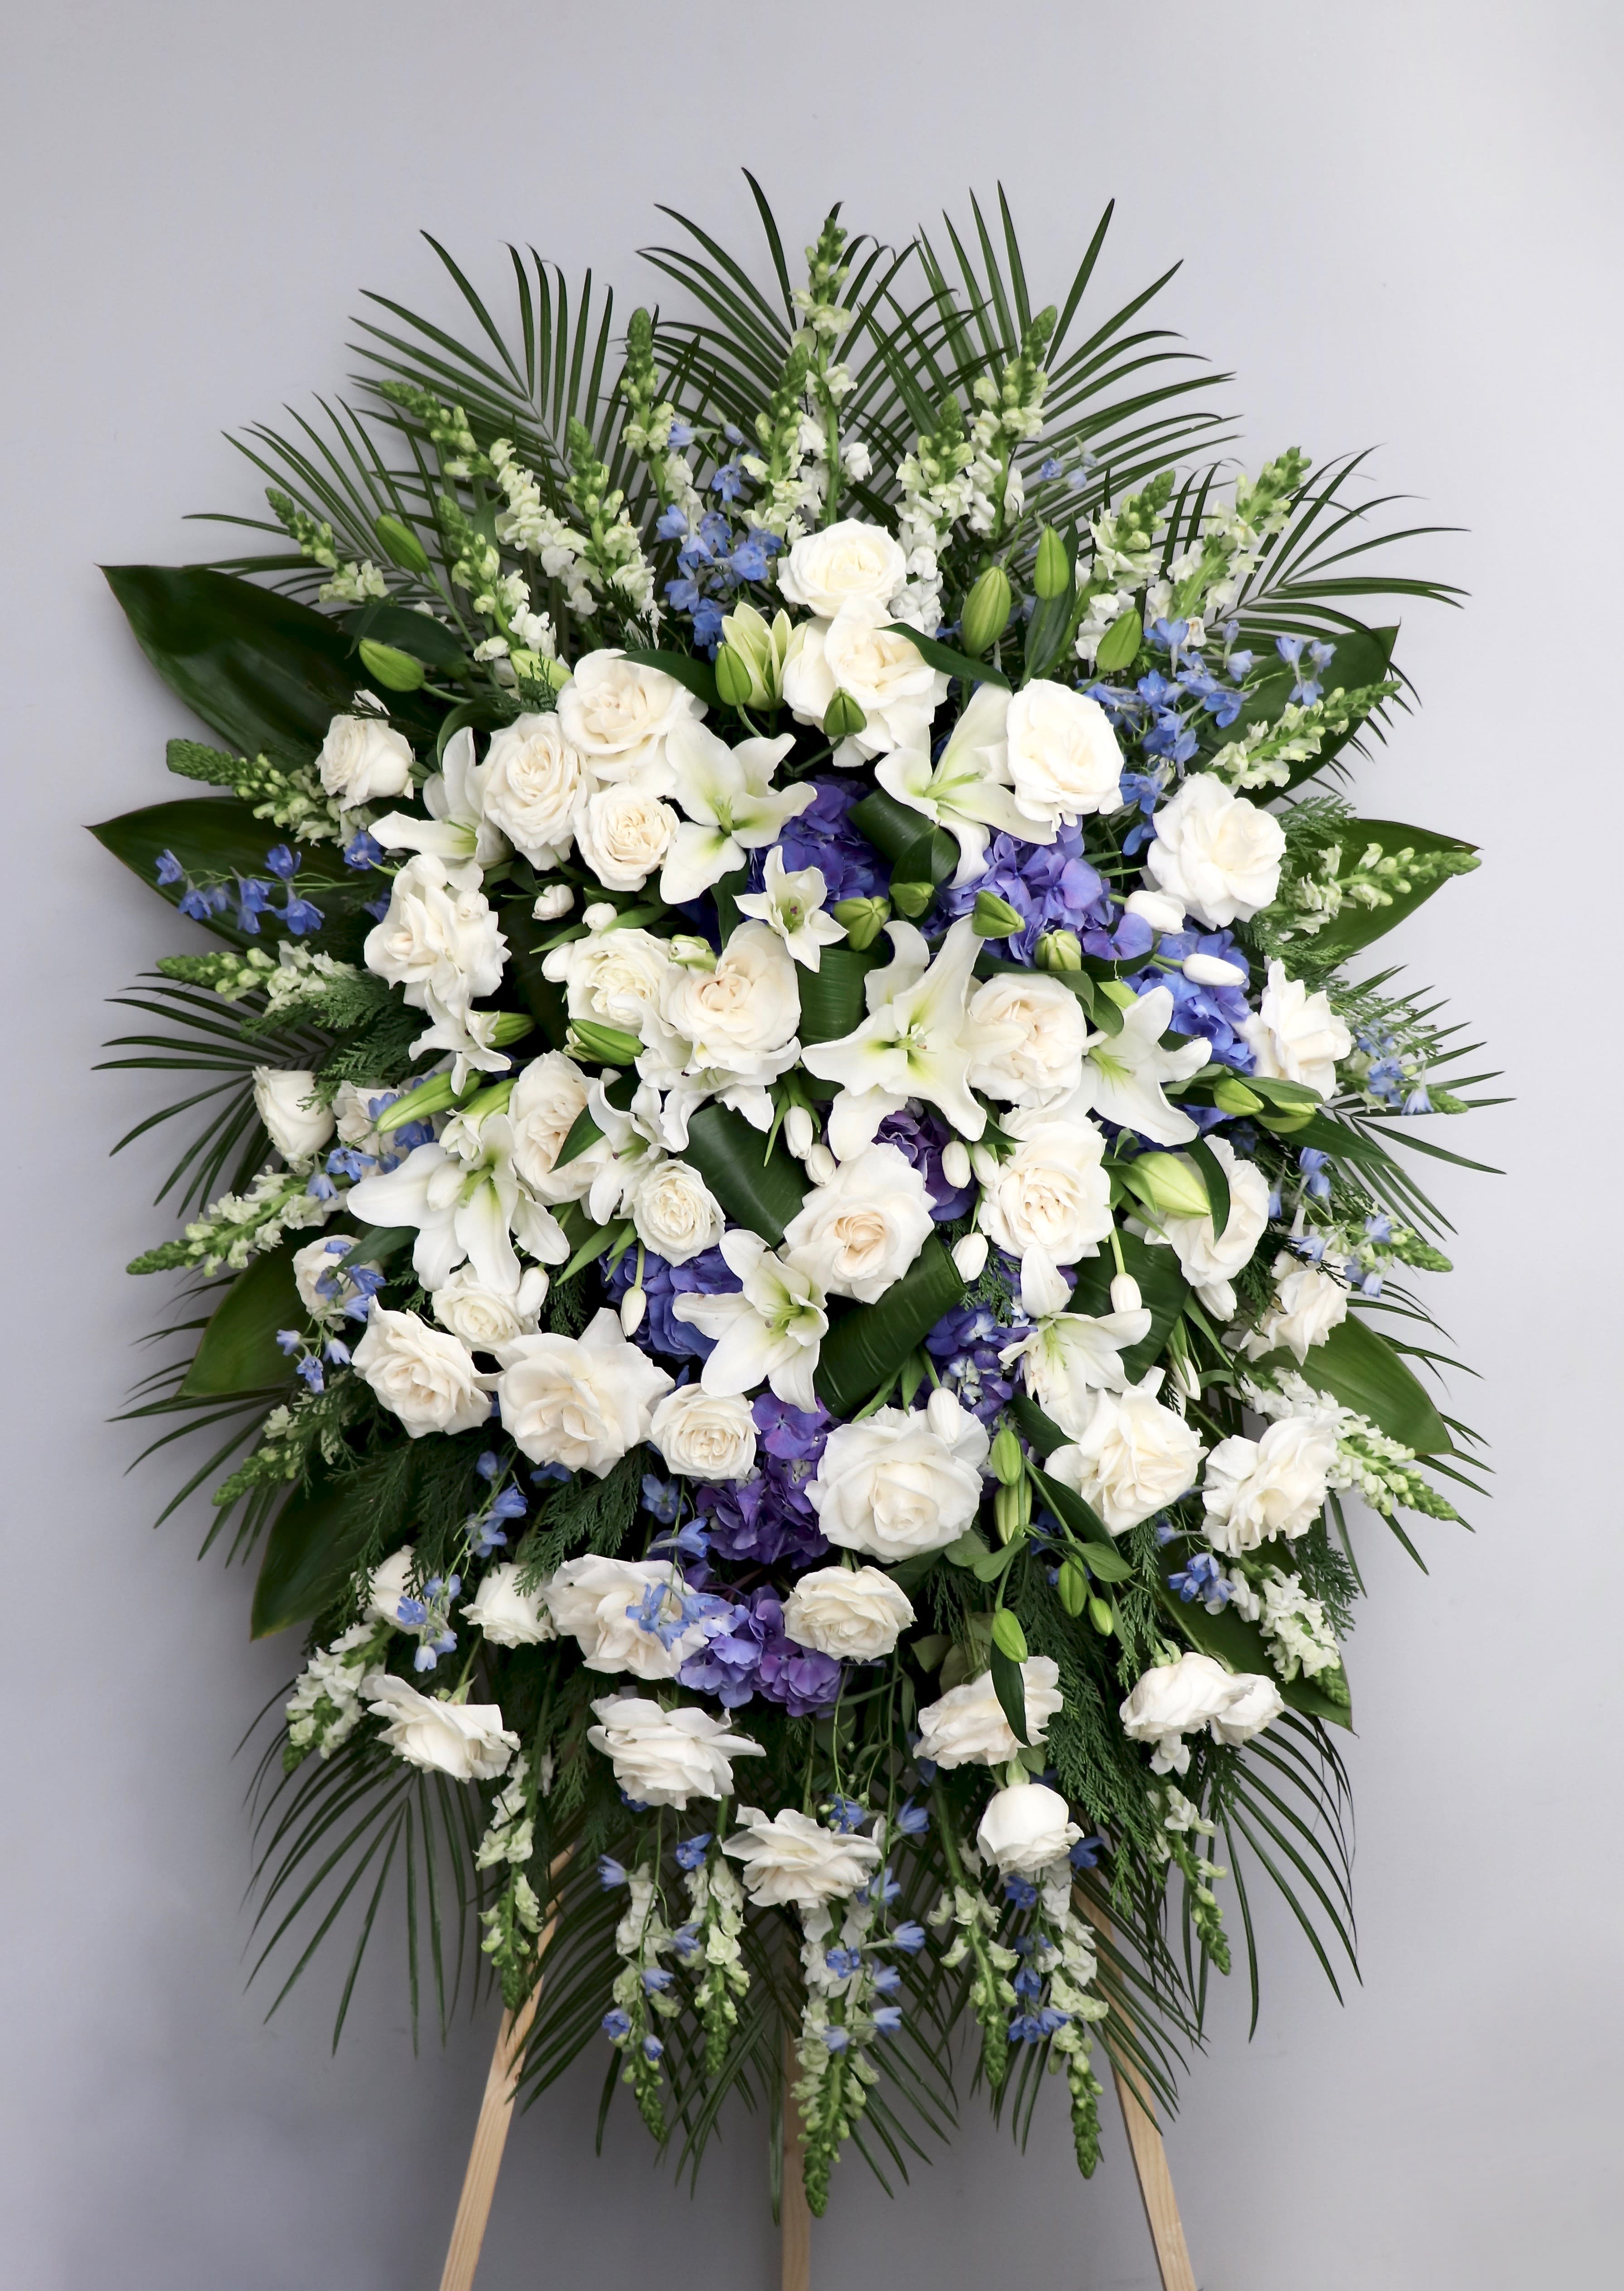 Lilie, Rose, and Delphinium Spray  - White rose and lilies with blue delphiniums.  We include easel, printed banner and delivery (some fees may apply).  Standard size is 30'' wide, deluxe is 36'', and premium is 42''.